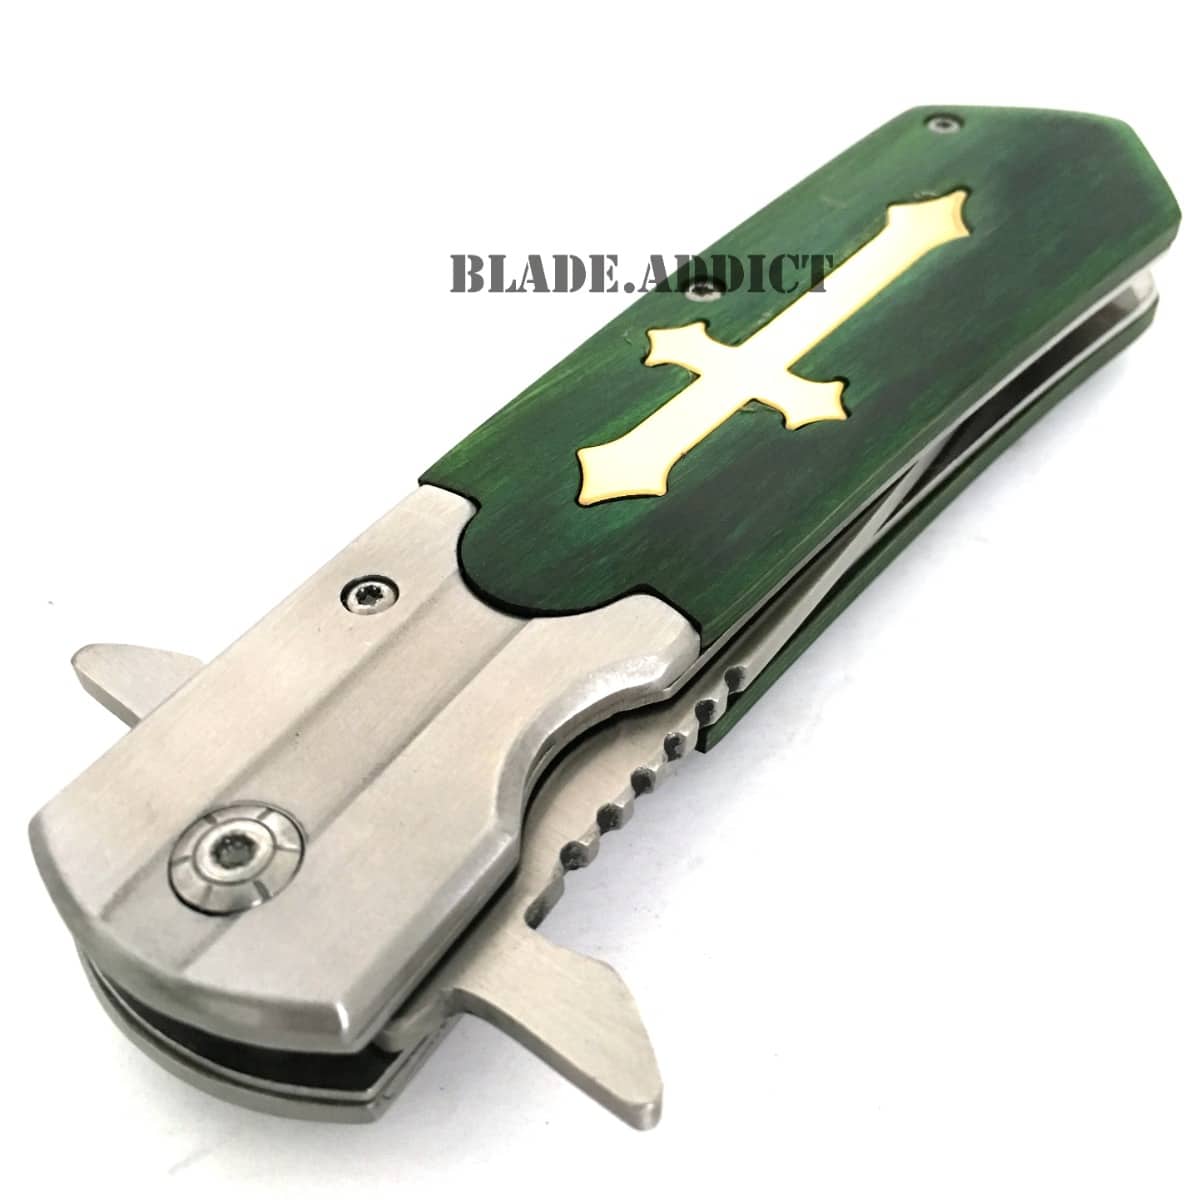 9.5 STAINLESS STEEL CELTIC CROSS SPRING ASSISTED OPEN POCKET KNIFE Gothic  EDC NEW